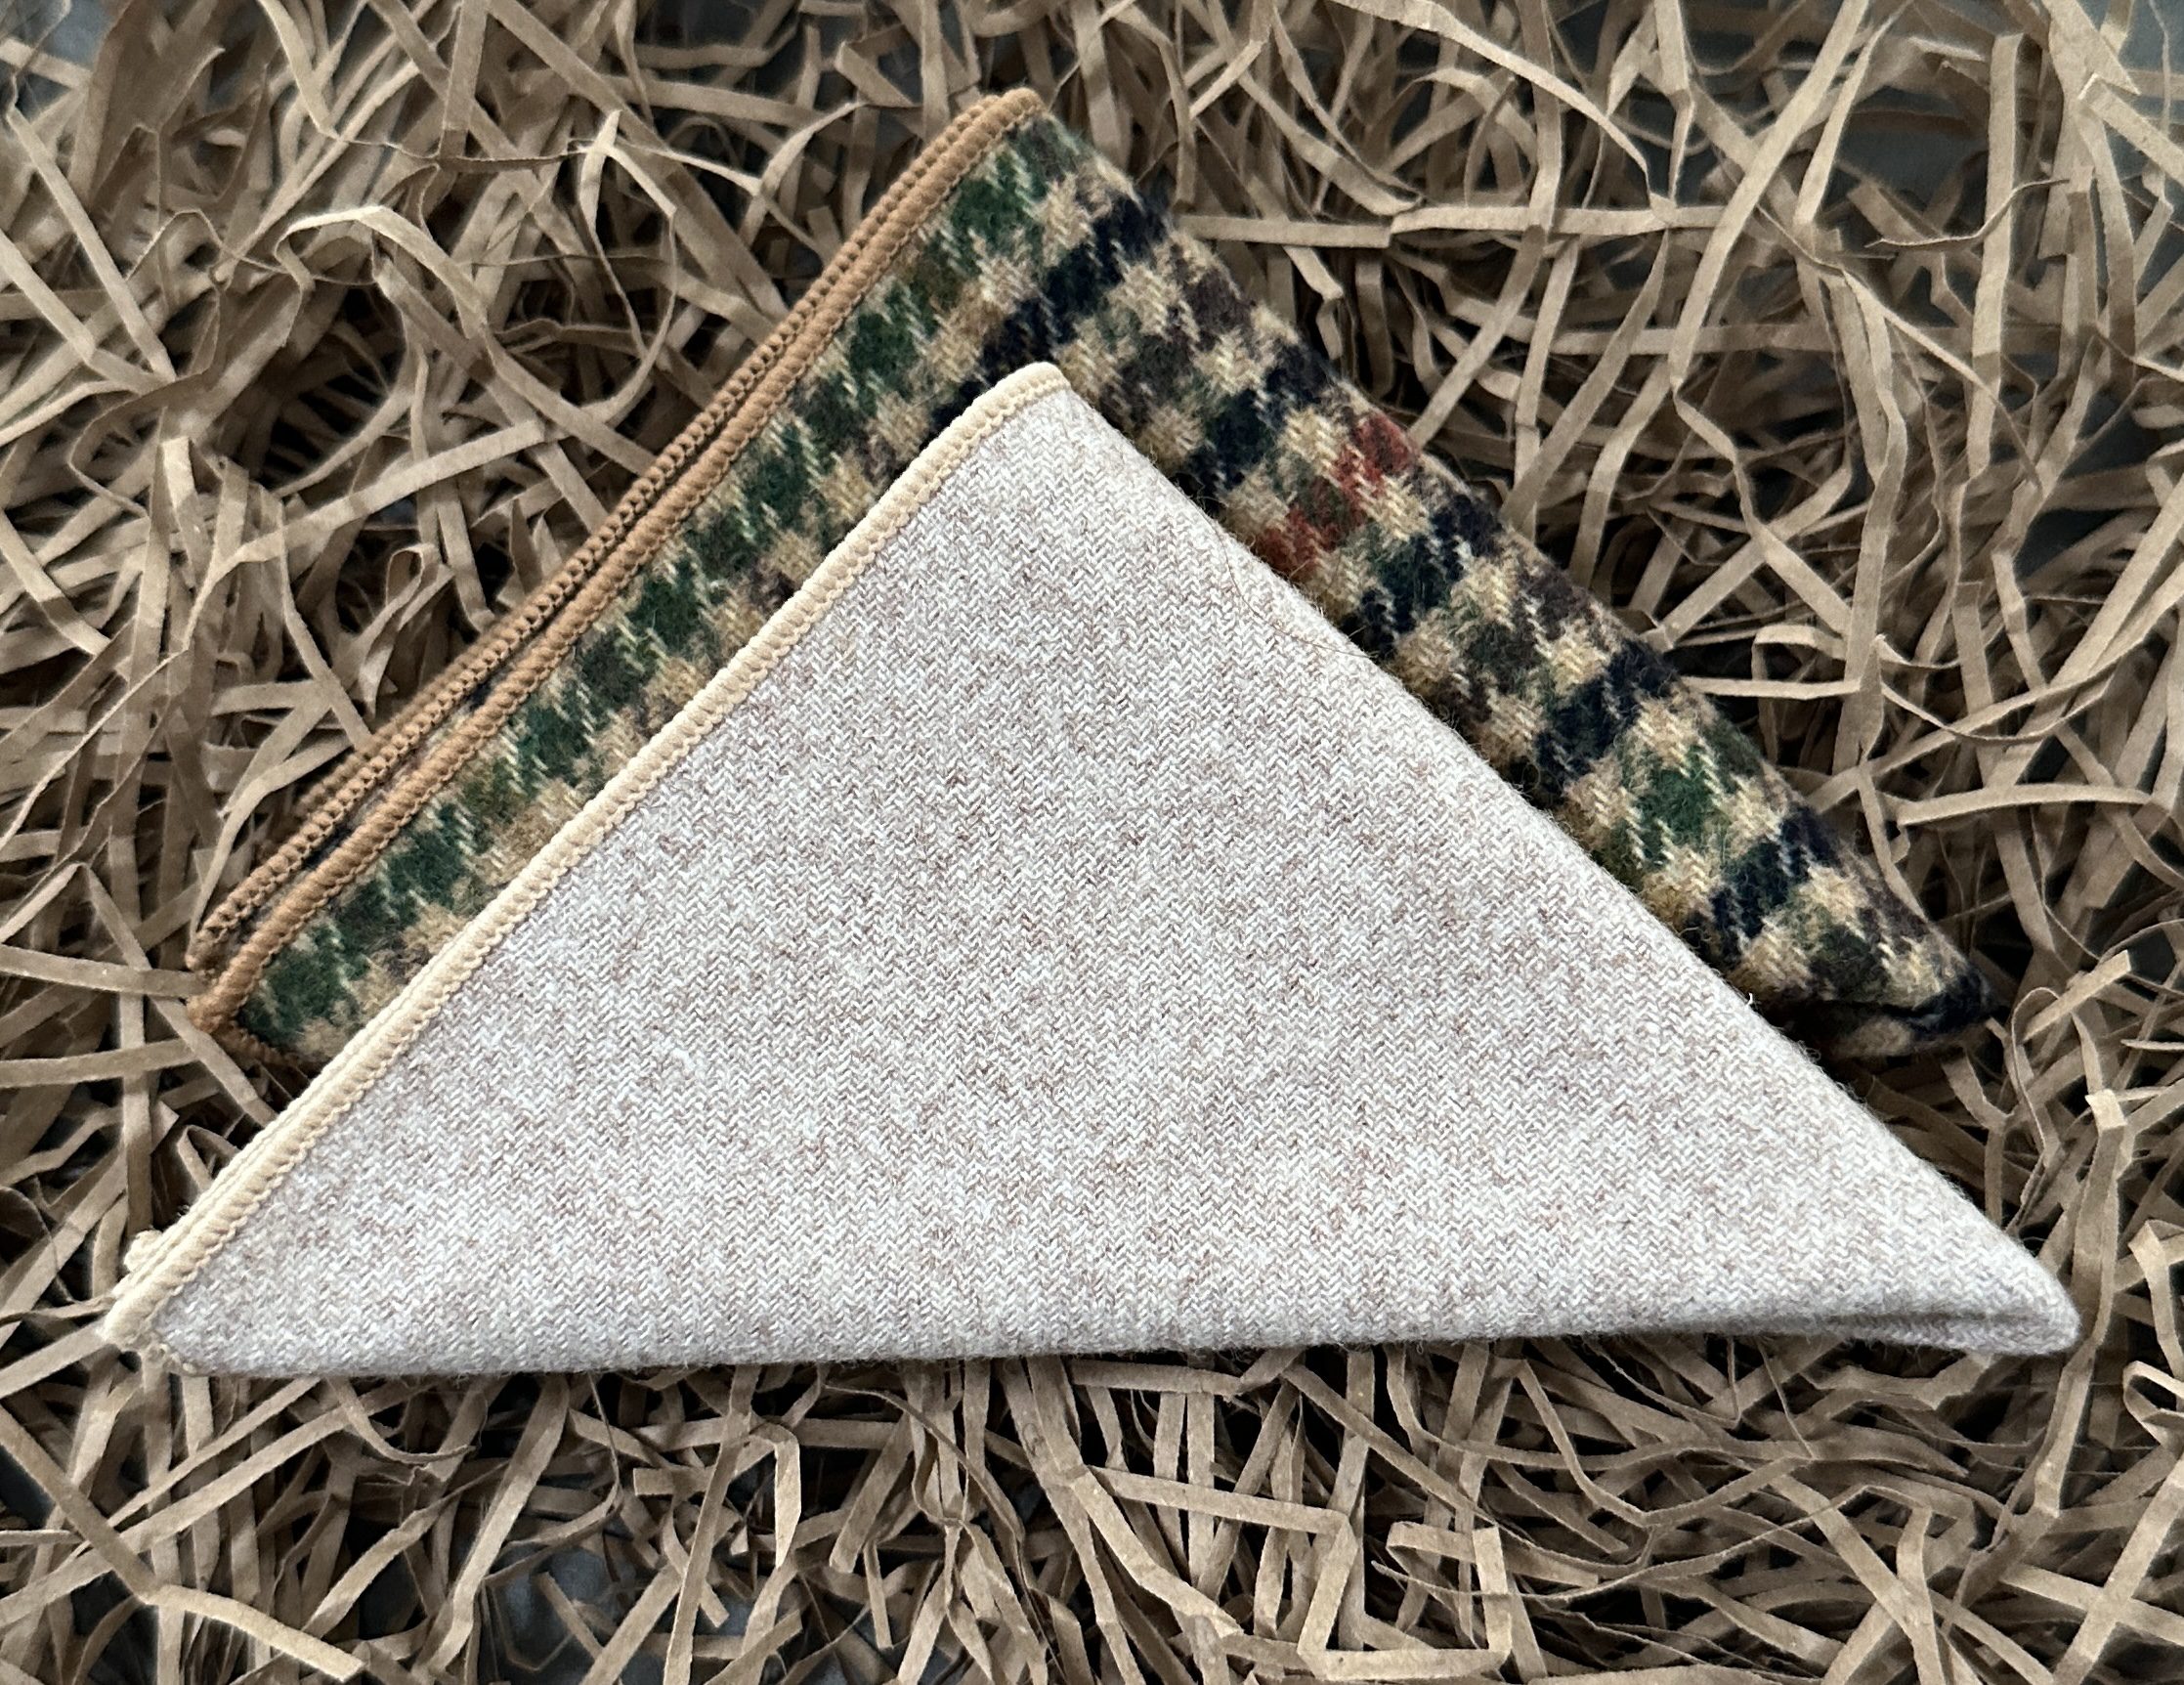 A set of two pocket squares one in check wool and the other in cream for mens's gifts and unique groomsmen gifts.